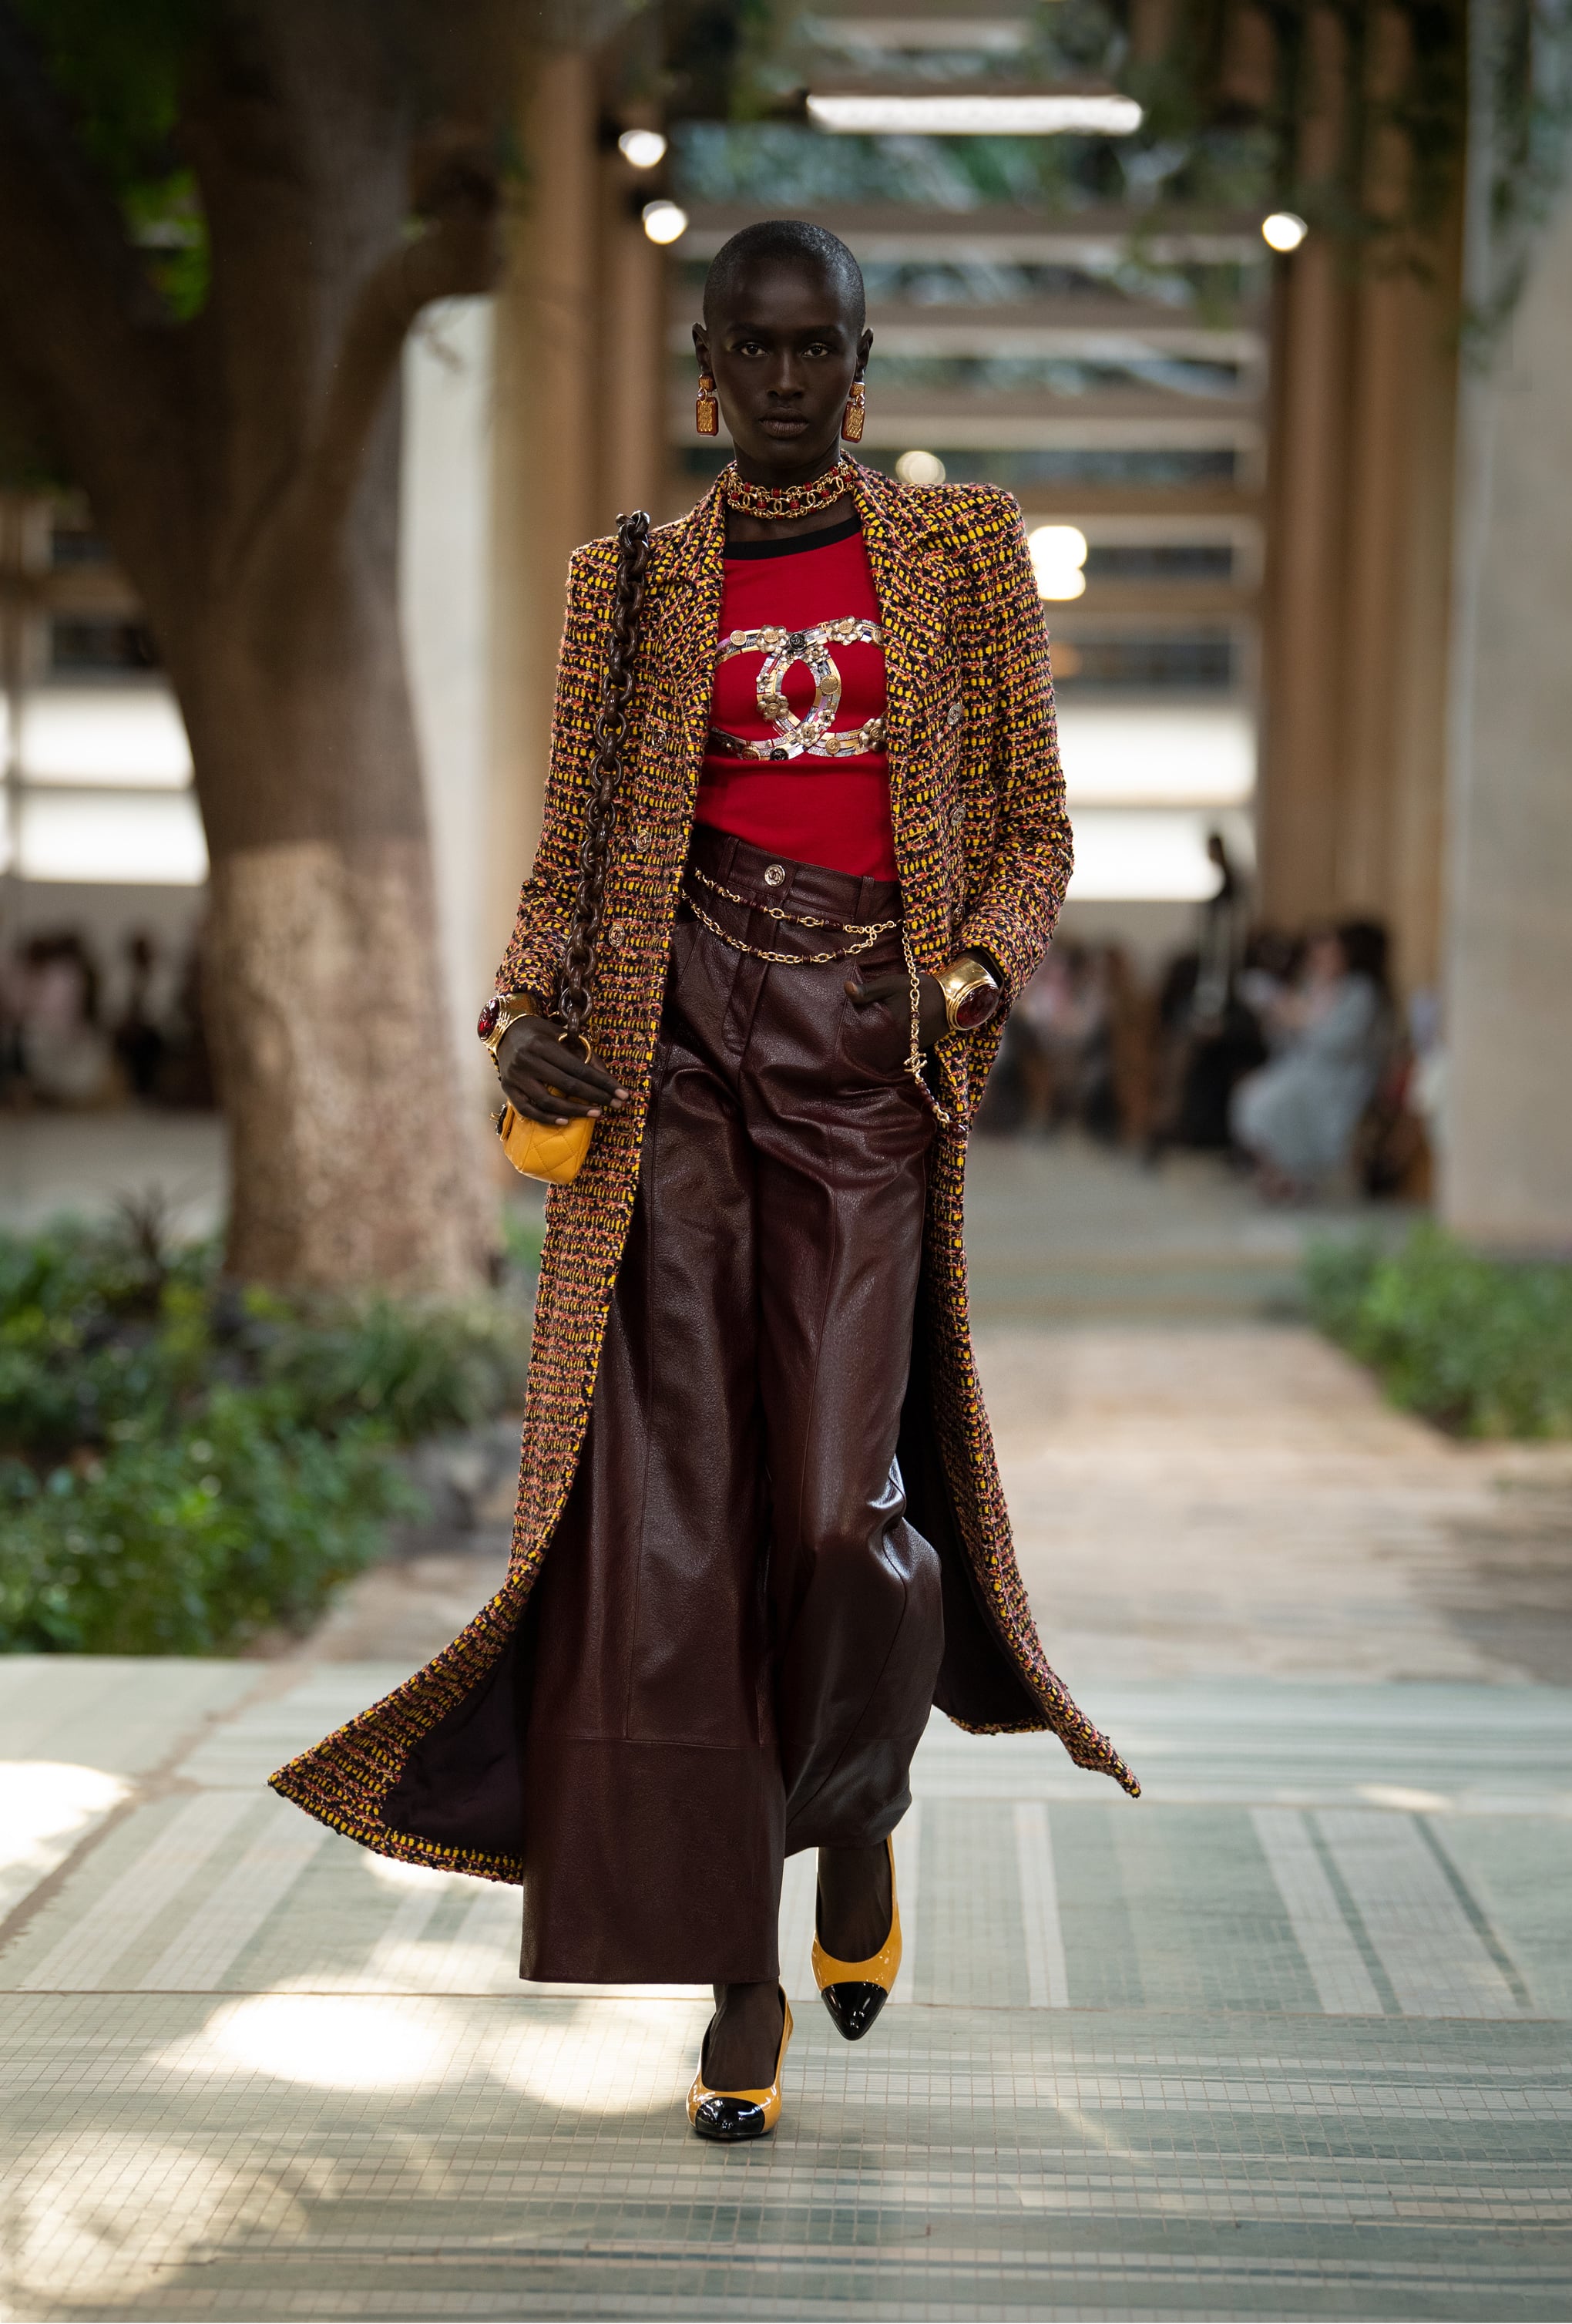 CHANEL PRE-FALL 2022 COLLECTION, Chanel Métiers D'art Fashion Show 2022